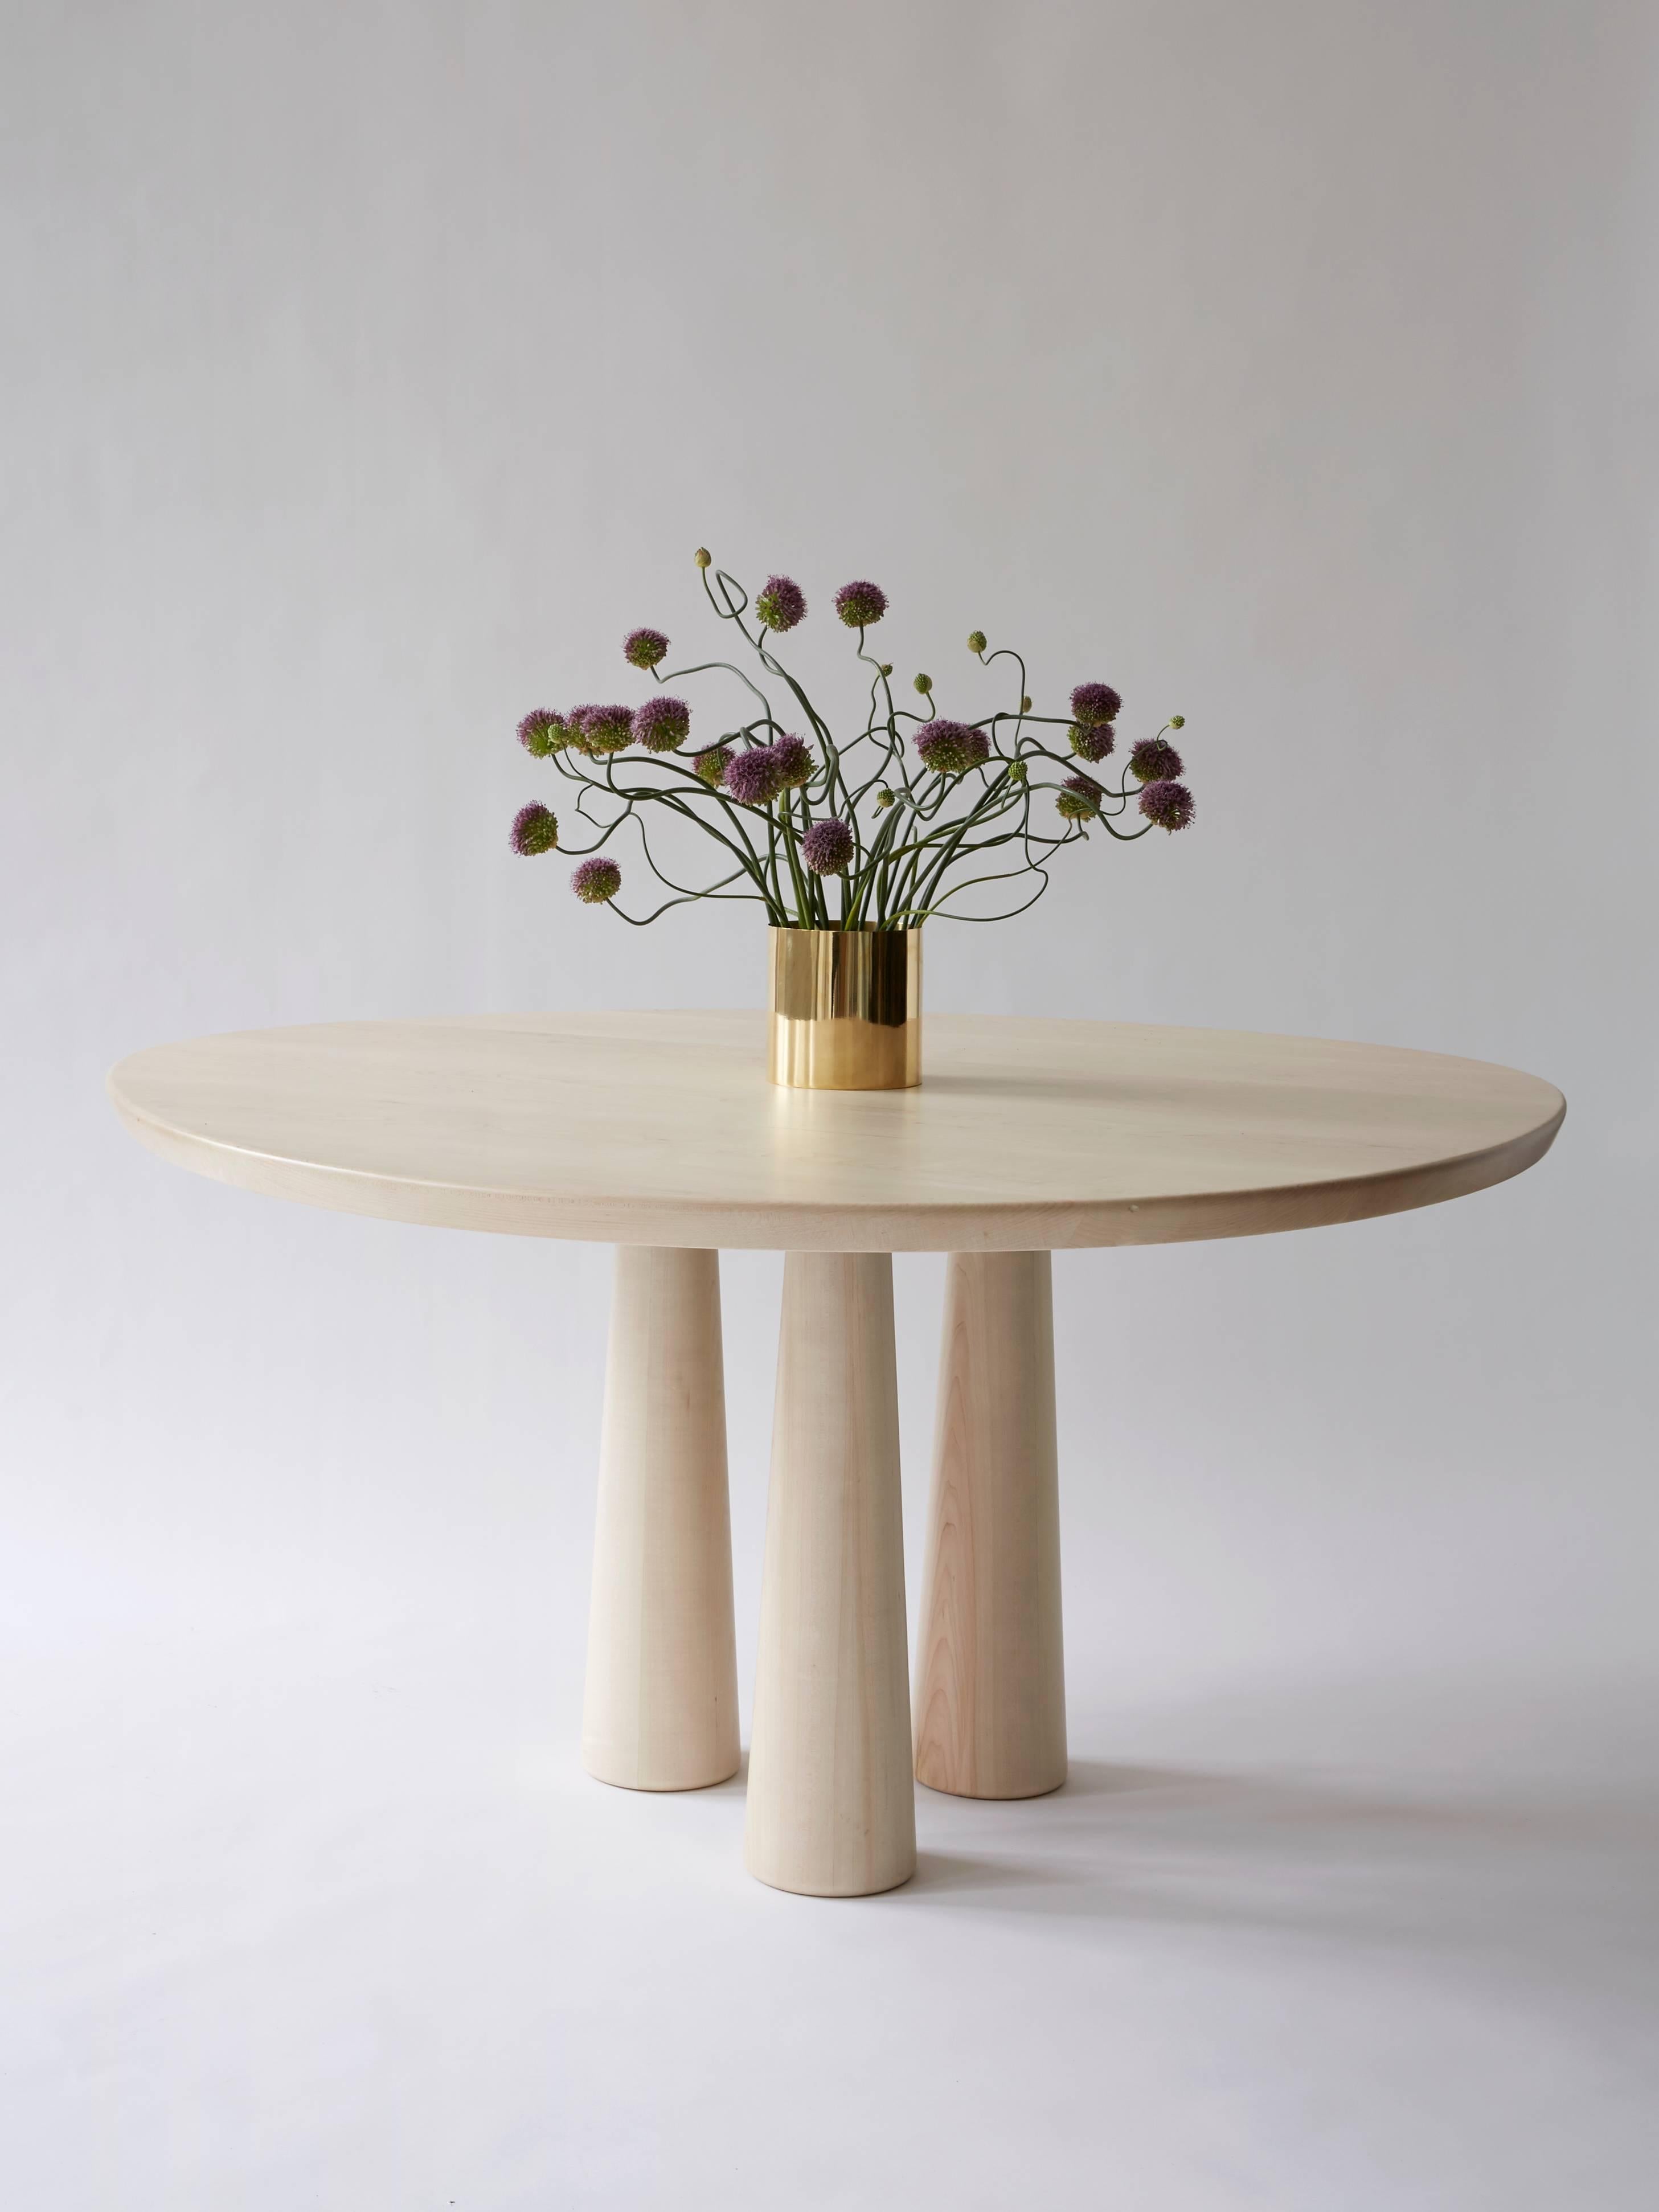 Not So General Gallery in Los Angeles is proud to present the Canopy Table.

Made of solid bleached hard maple with matte lacquer finish, the Canopy Table from Moving Mountains Studio is the perfect intersection of design, beauty and function. 

An